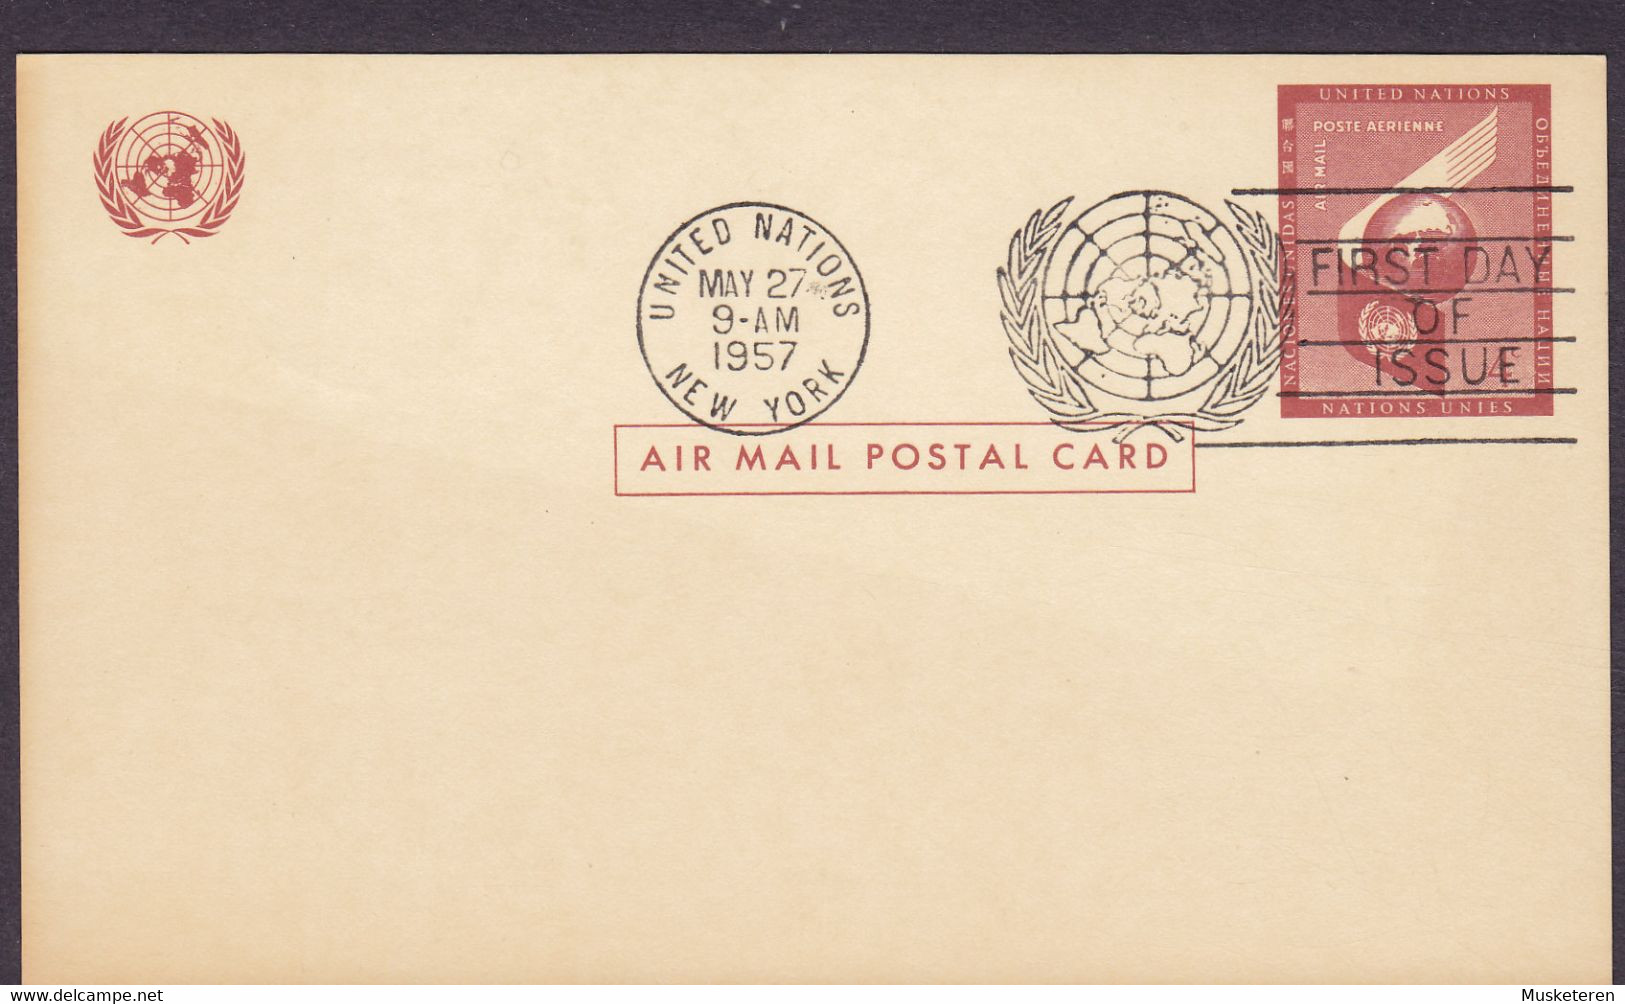 United Nations Postal Stationery Ganzsache Entier NEW YORK First Day Of Issue 1957 Air Mail Postal Card - Briefe U. Dokumente